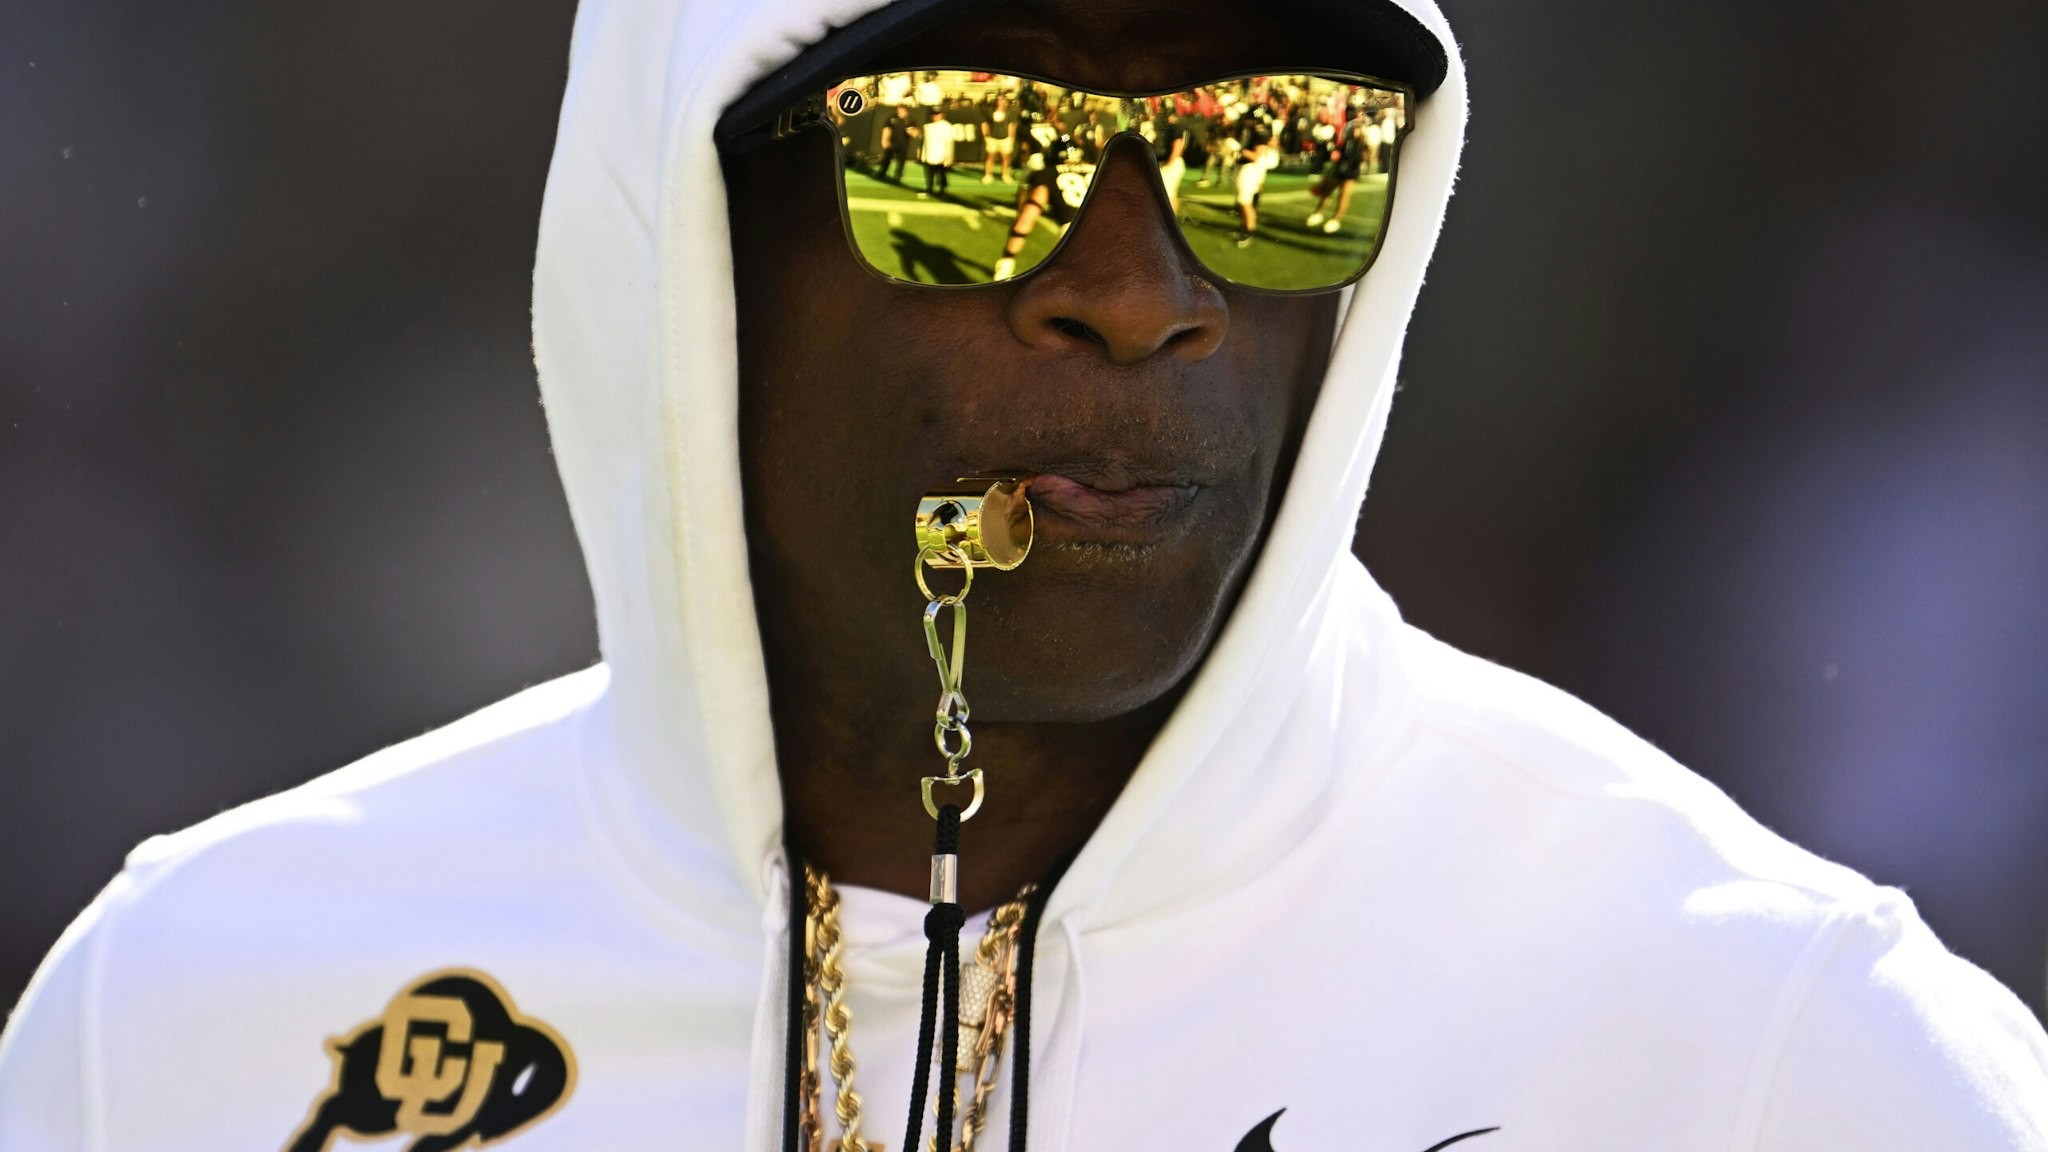 BOULDER, COLORADO - AUGUST 9: Head Coach Deion Sanders takes the field during warmups at Folsom Field on September 9, 2023 in Boulder, Colorado. Coach Sanders will lead the Colorado Buffaloes in a matchup against their long-time rivals, the Nebraska Cornhuskers, during Coach Prime's highly anticipated home debut.